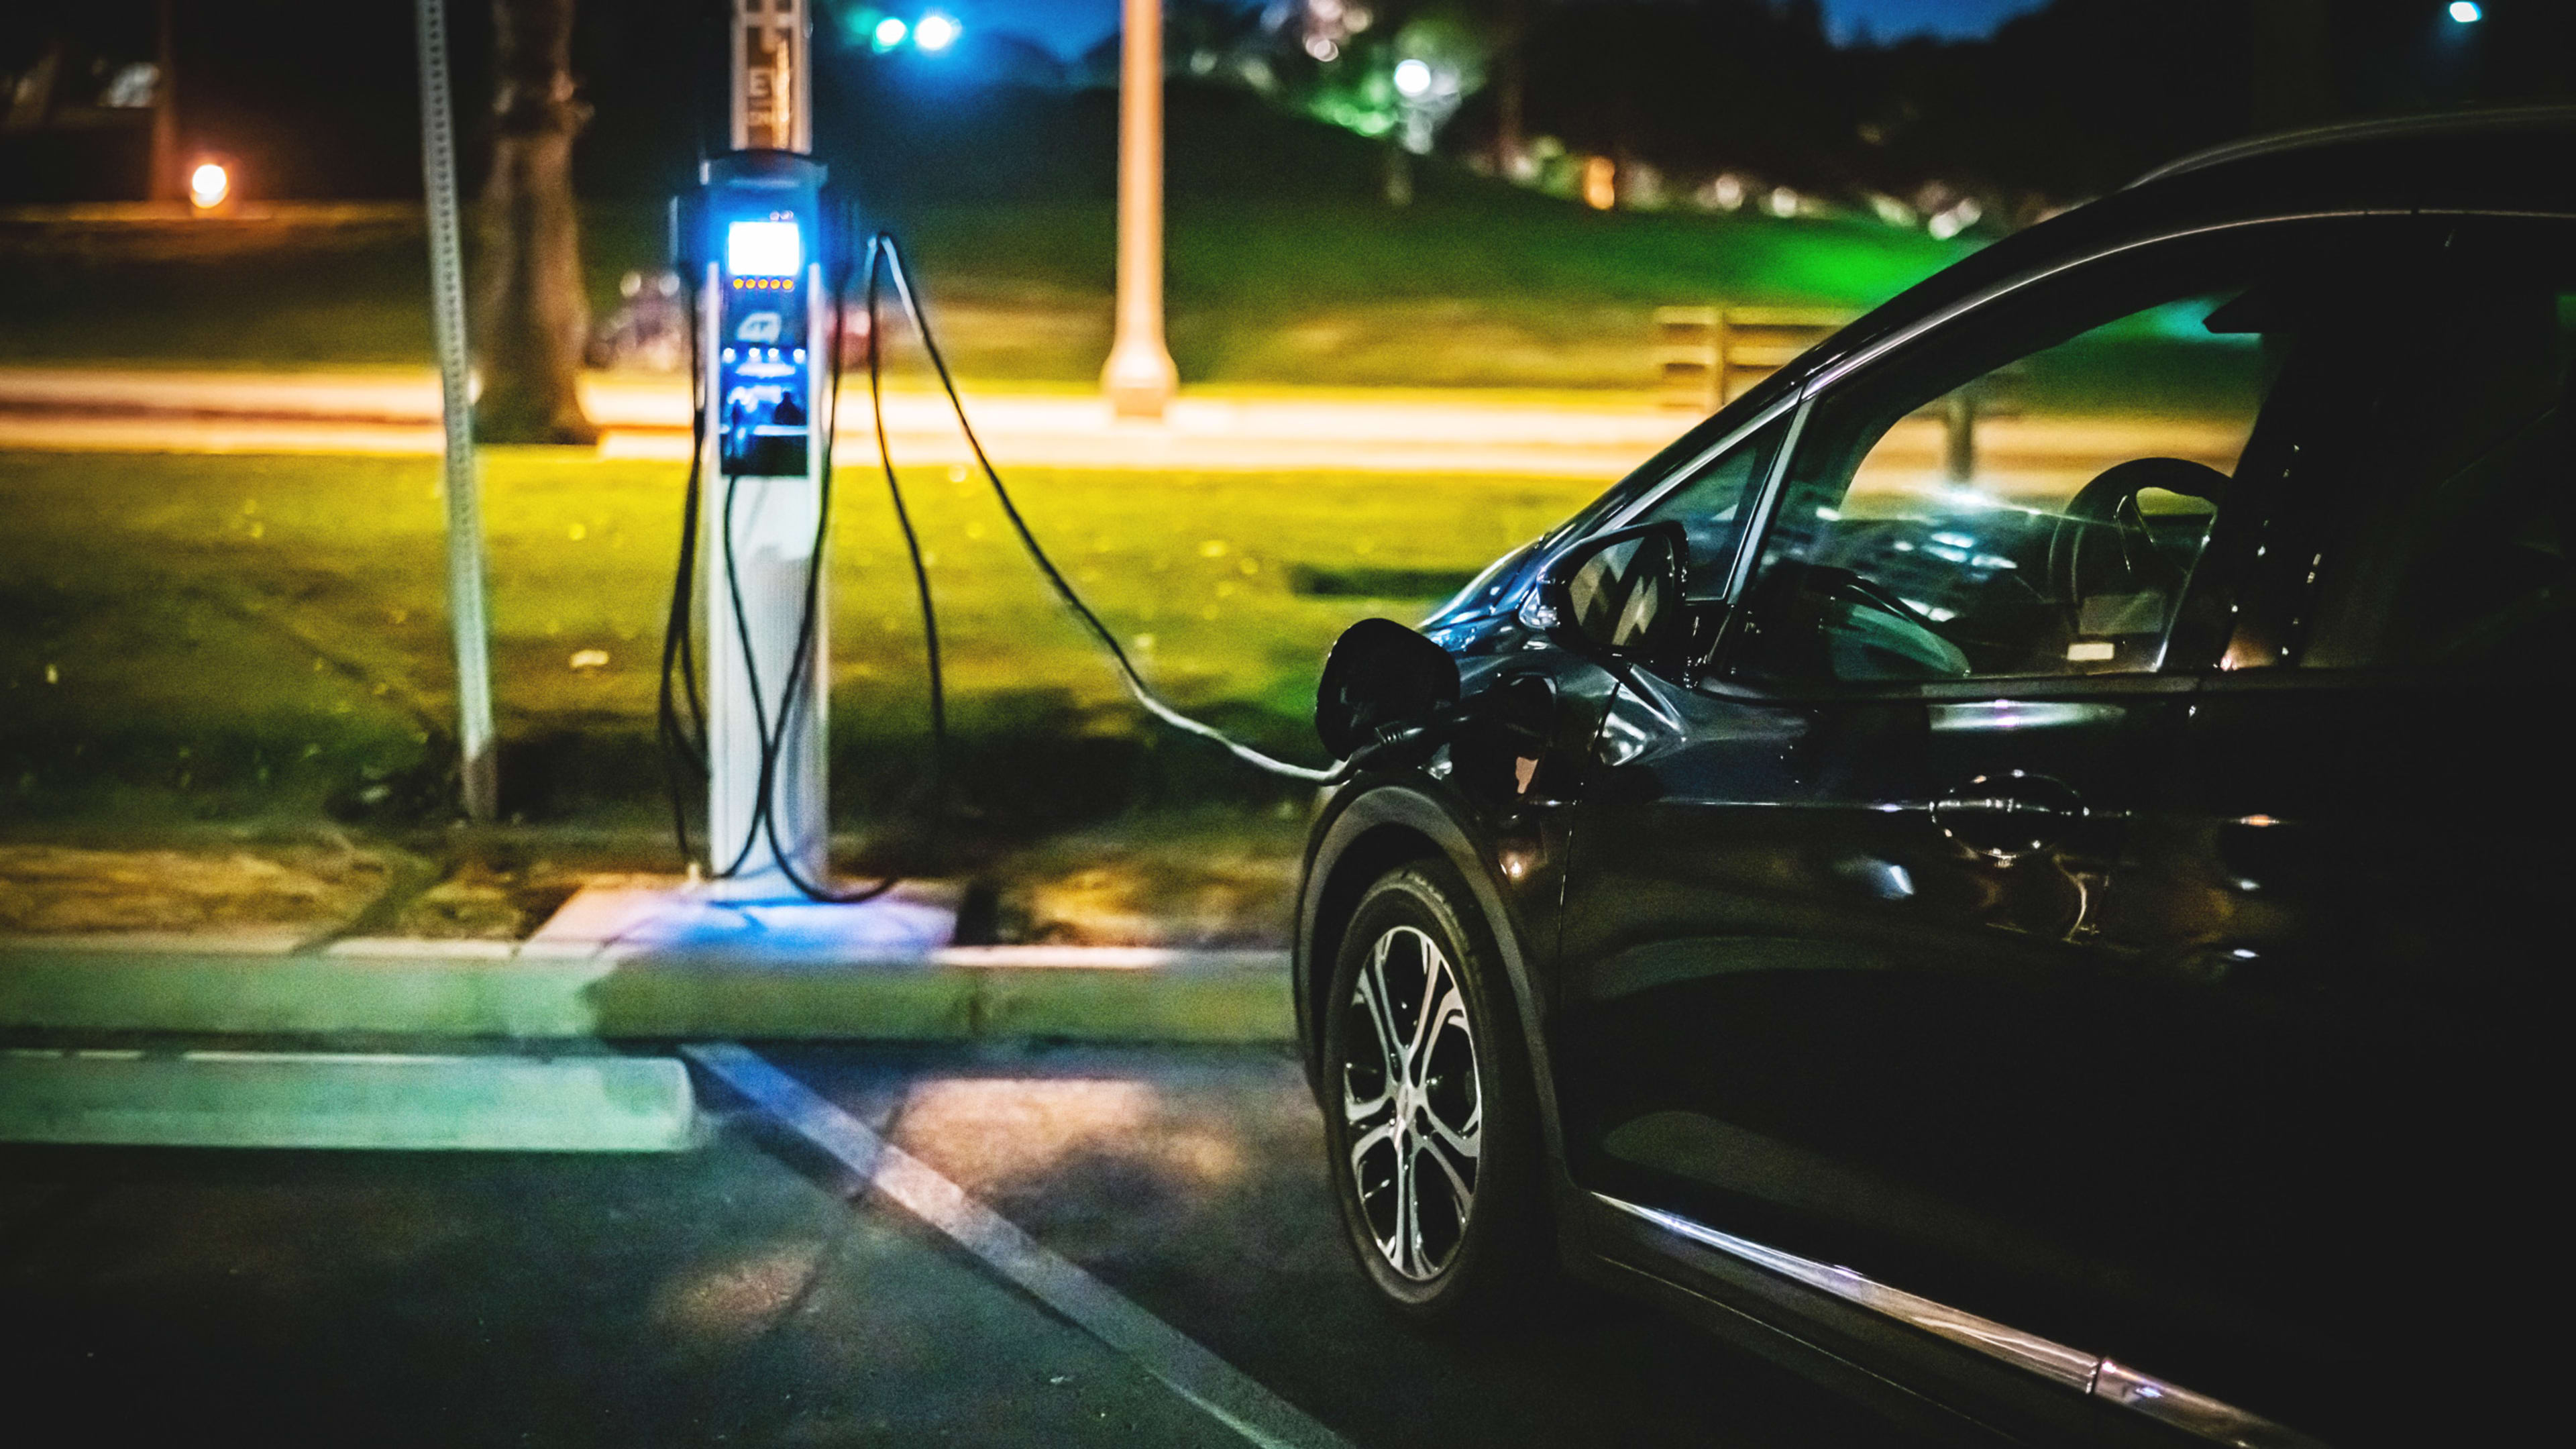 Who should build all our EV charging networks?